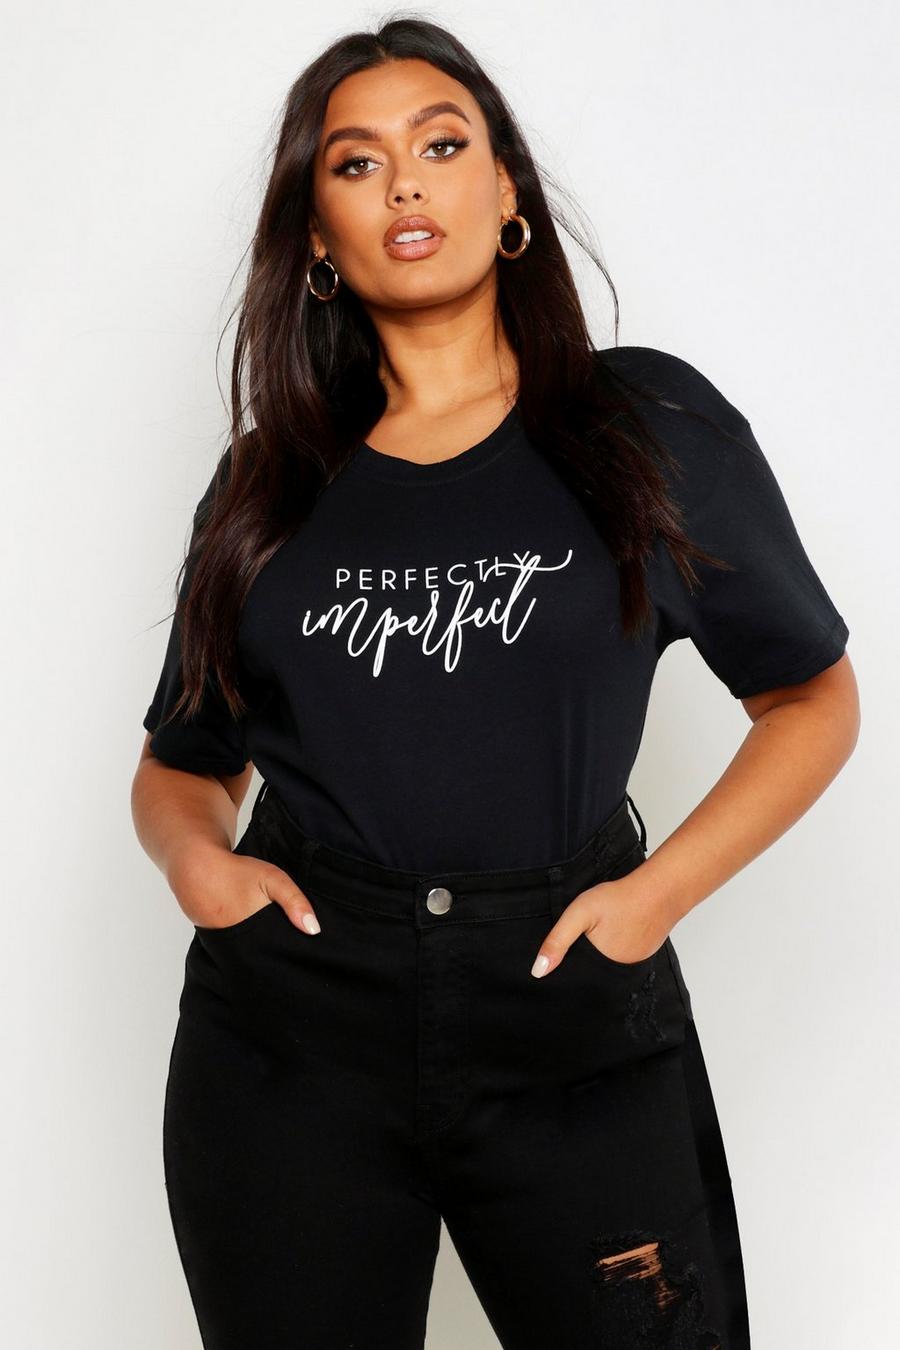 T-shirt Plus Size con slogan Perfectly Imperfect, Nero negro image number 1